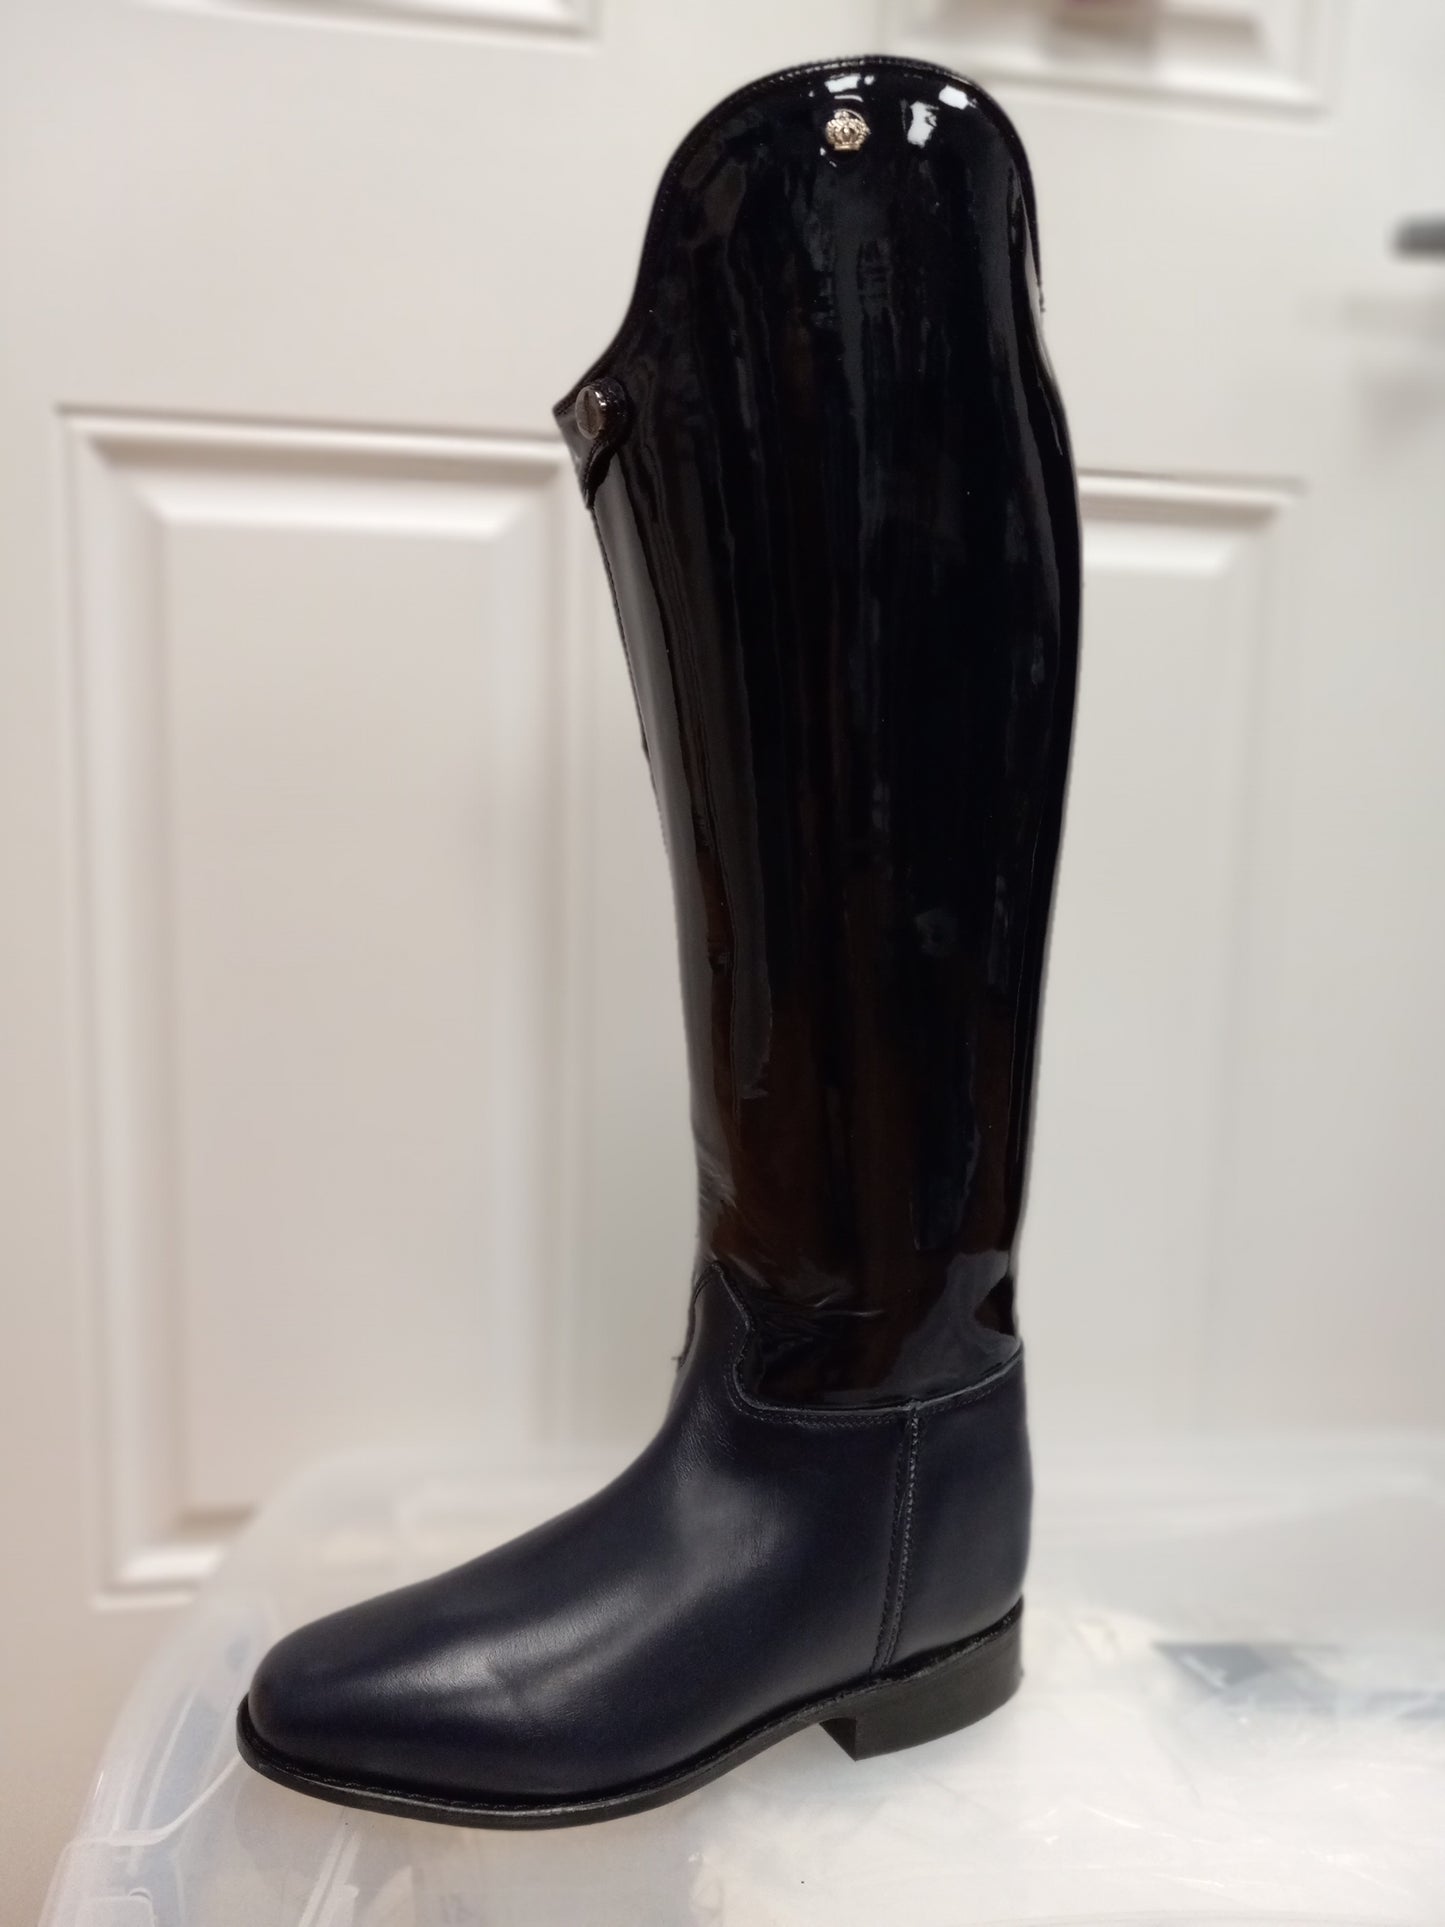 Navy Patent Konigs Riding Boots – The Horse of Course